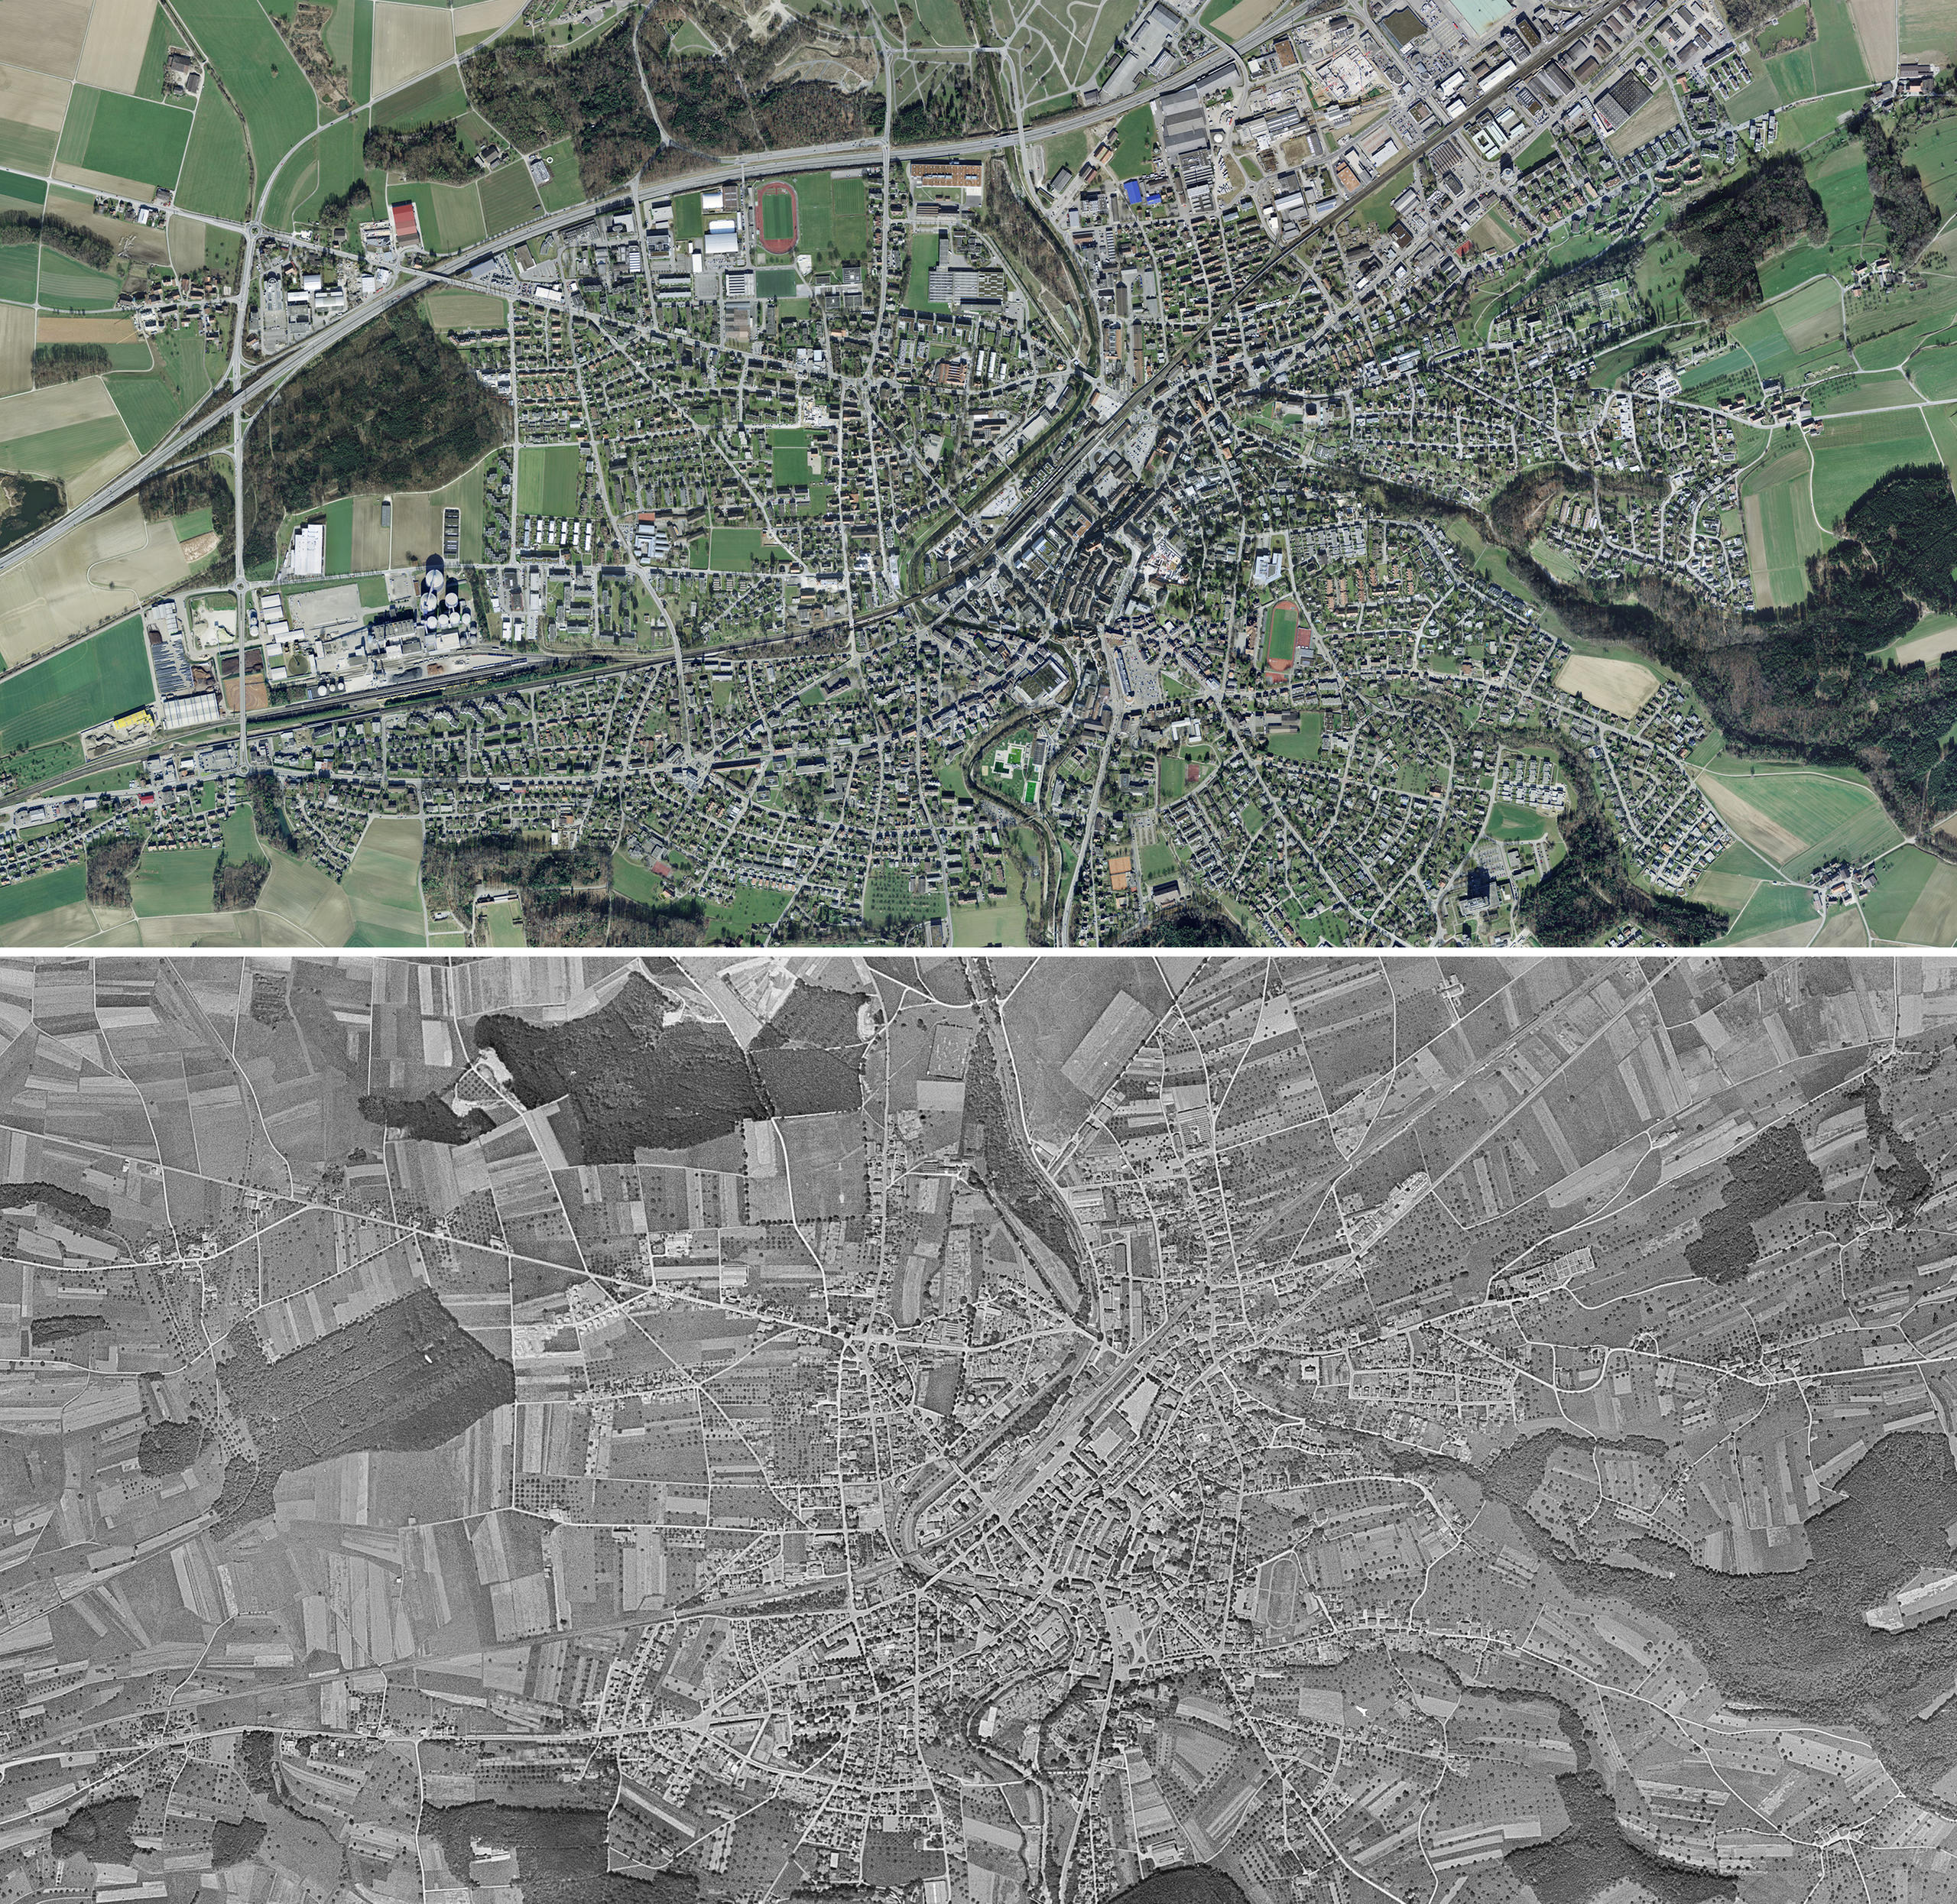 Aerial view of Frauenfeld above 2014 and below in 1946